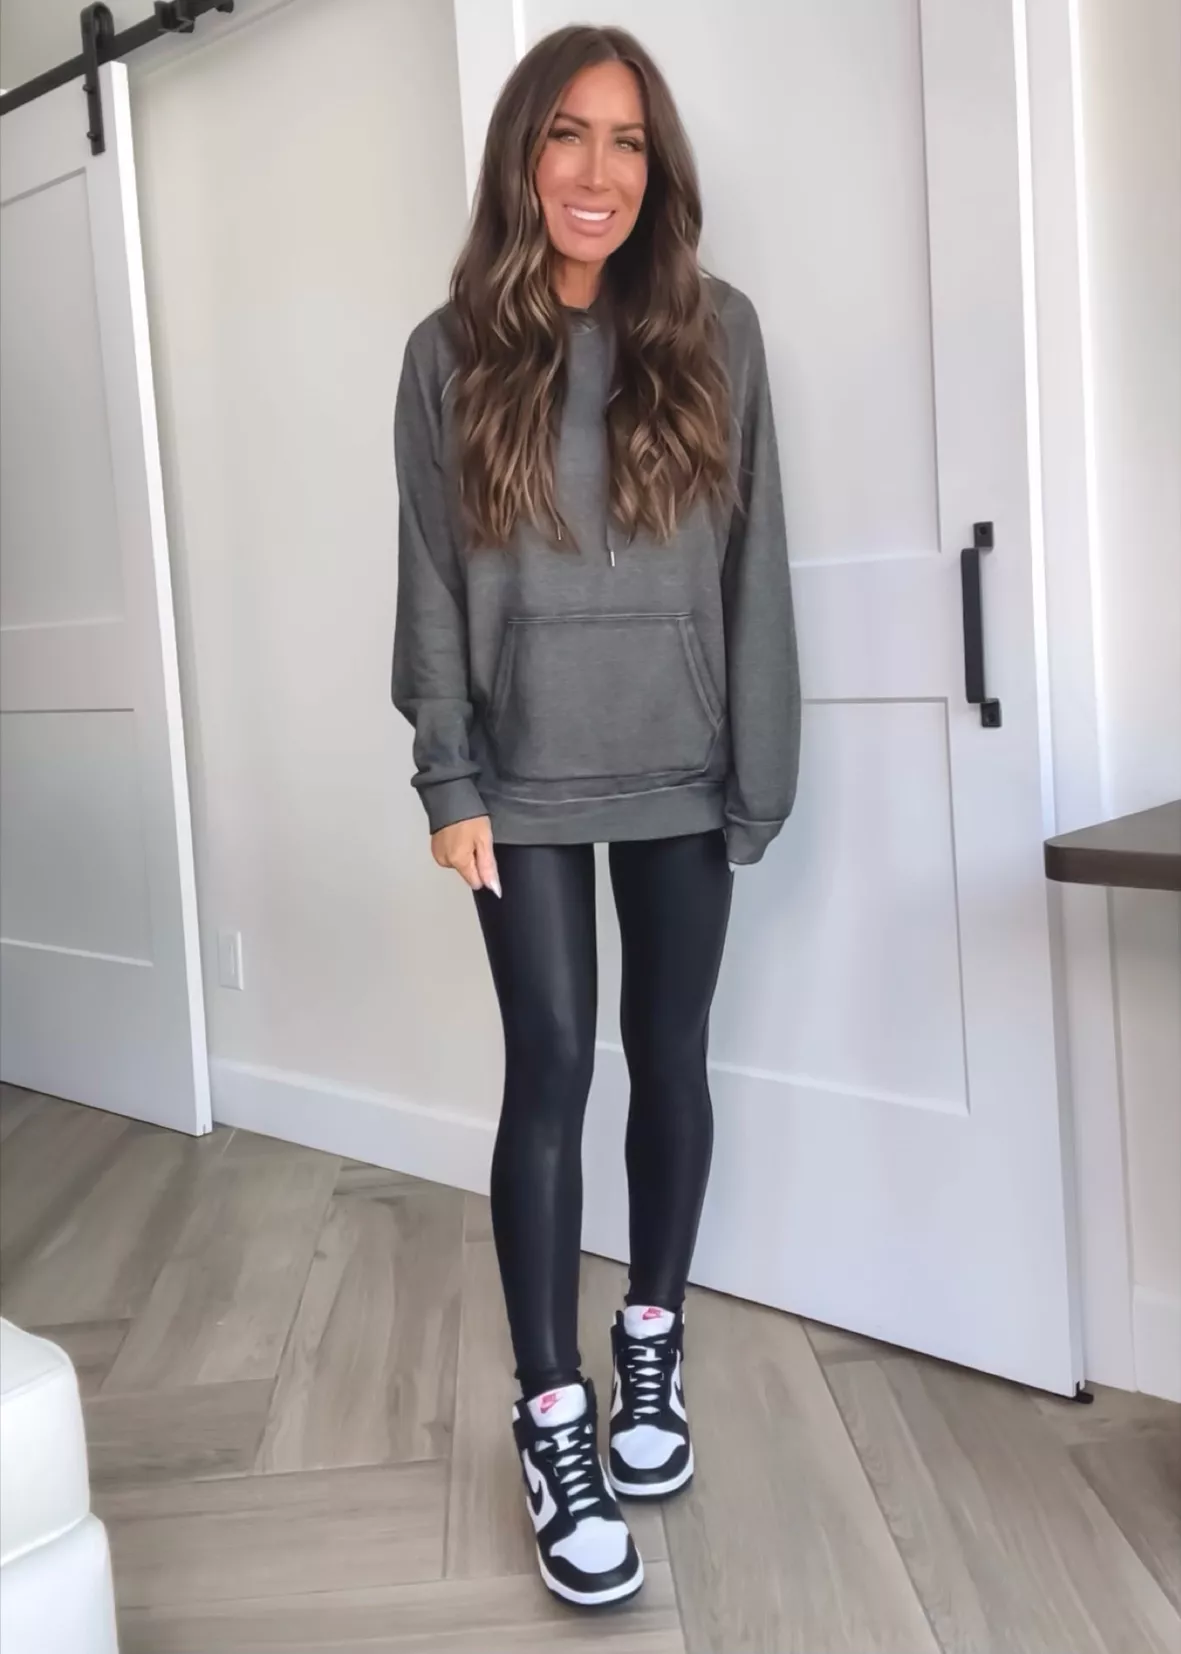 Grey Leggings with Grey Shoes Outfits (10 ideas & outfits)